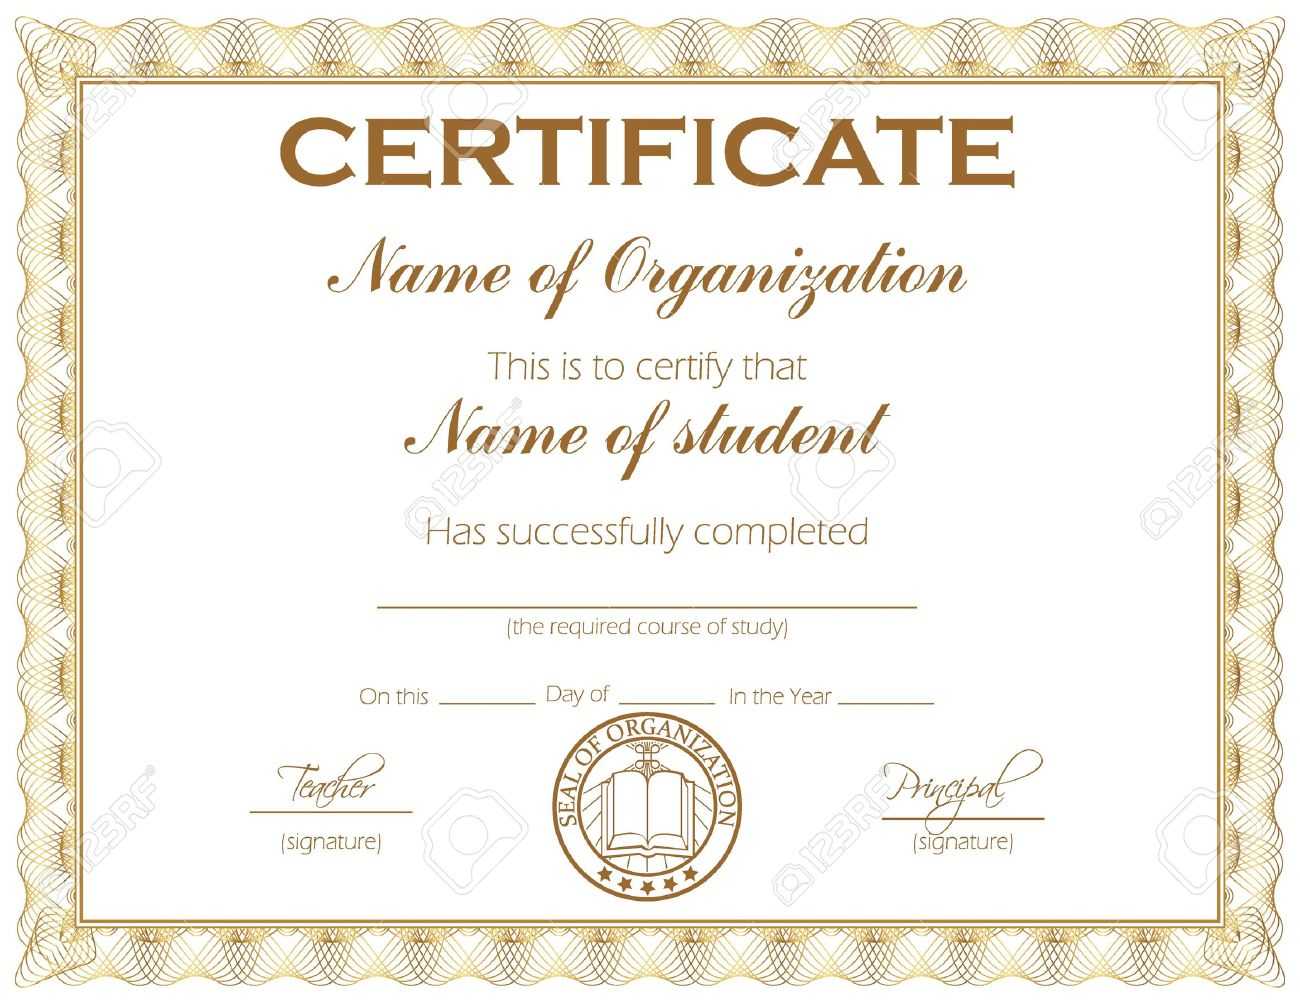 General Purpose Certificate Or Award With Sample Text That Can.. With Regard To Student Of The Year Award Certificate Templates